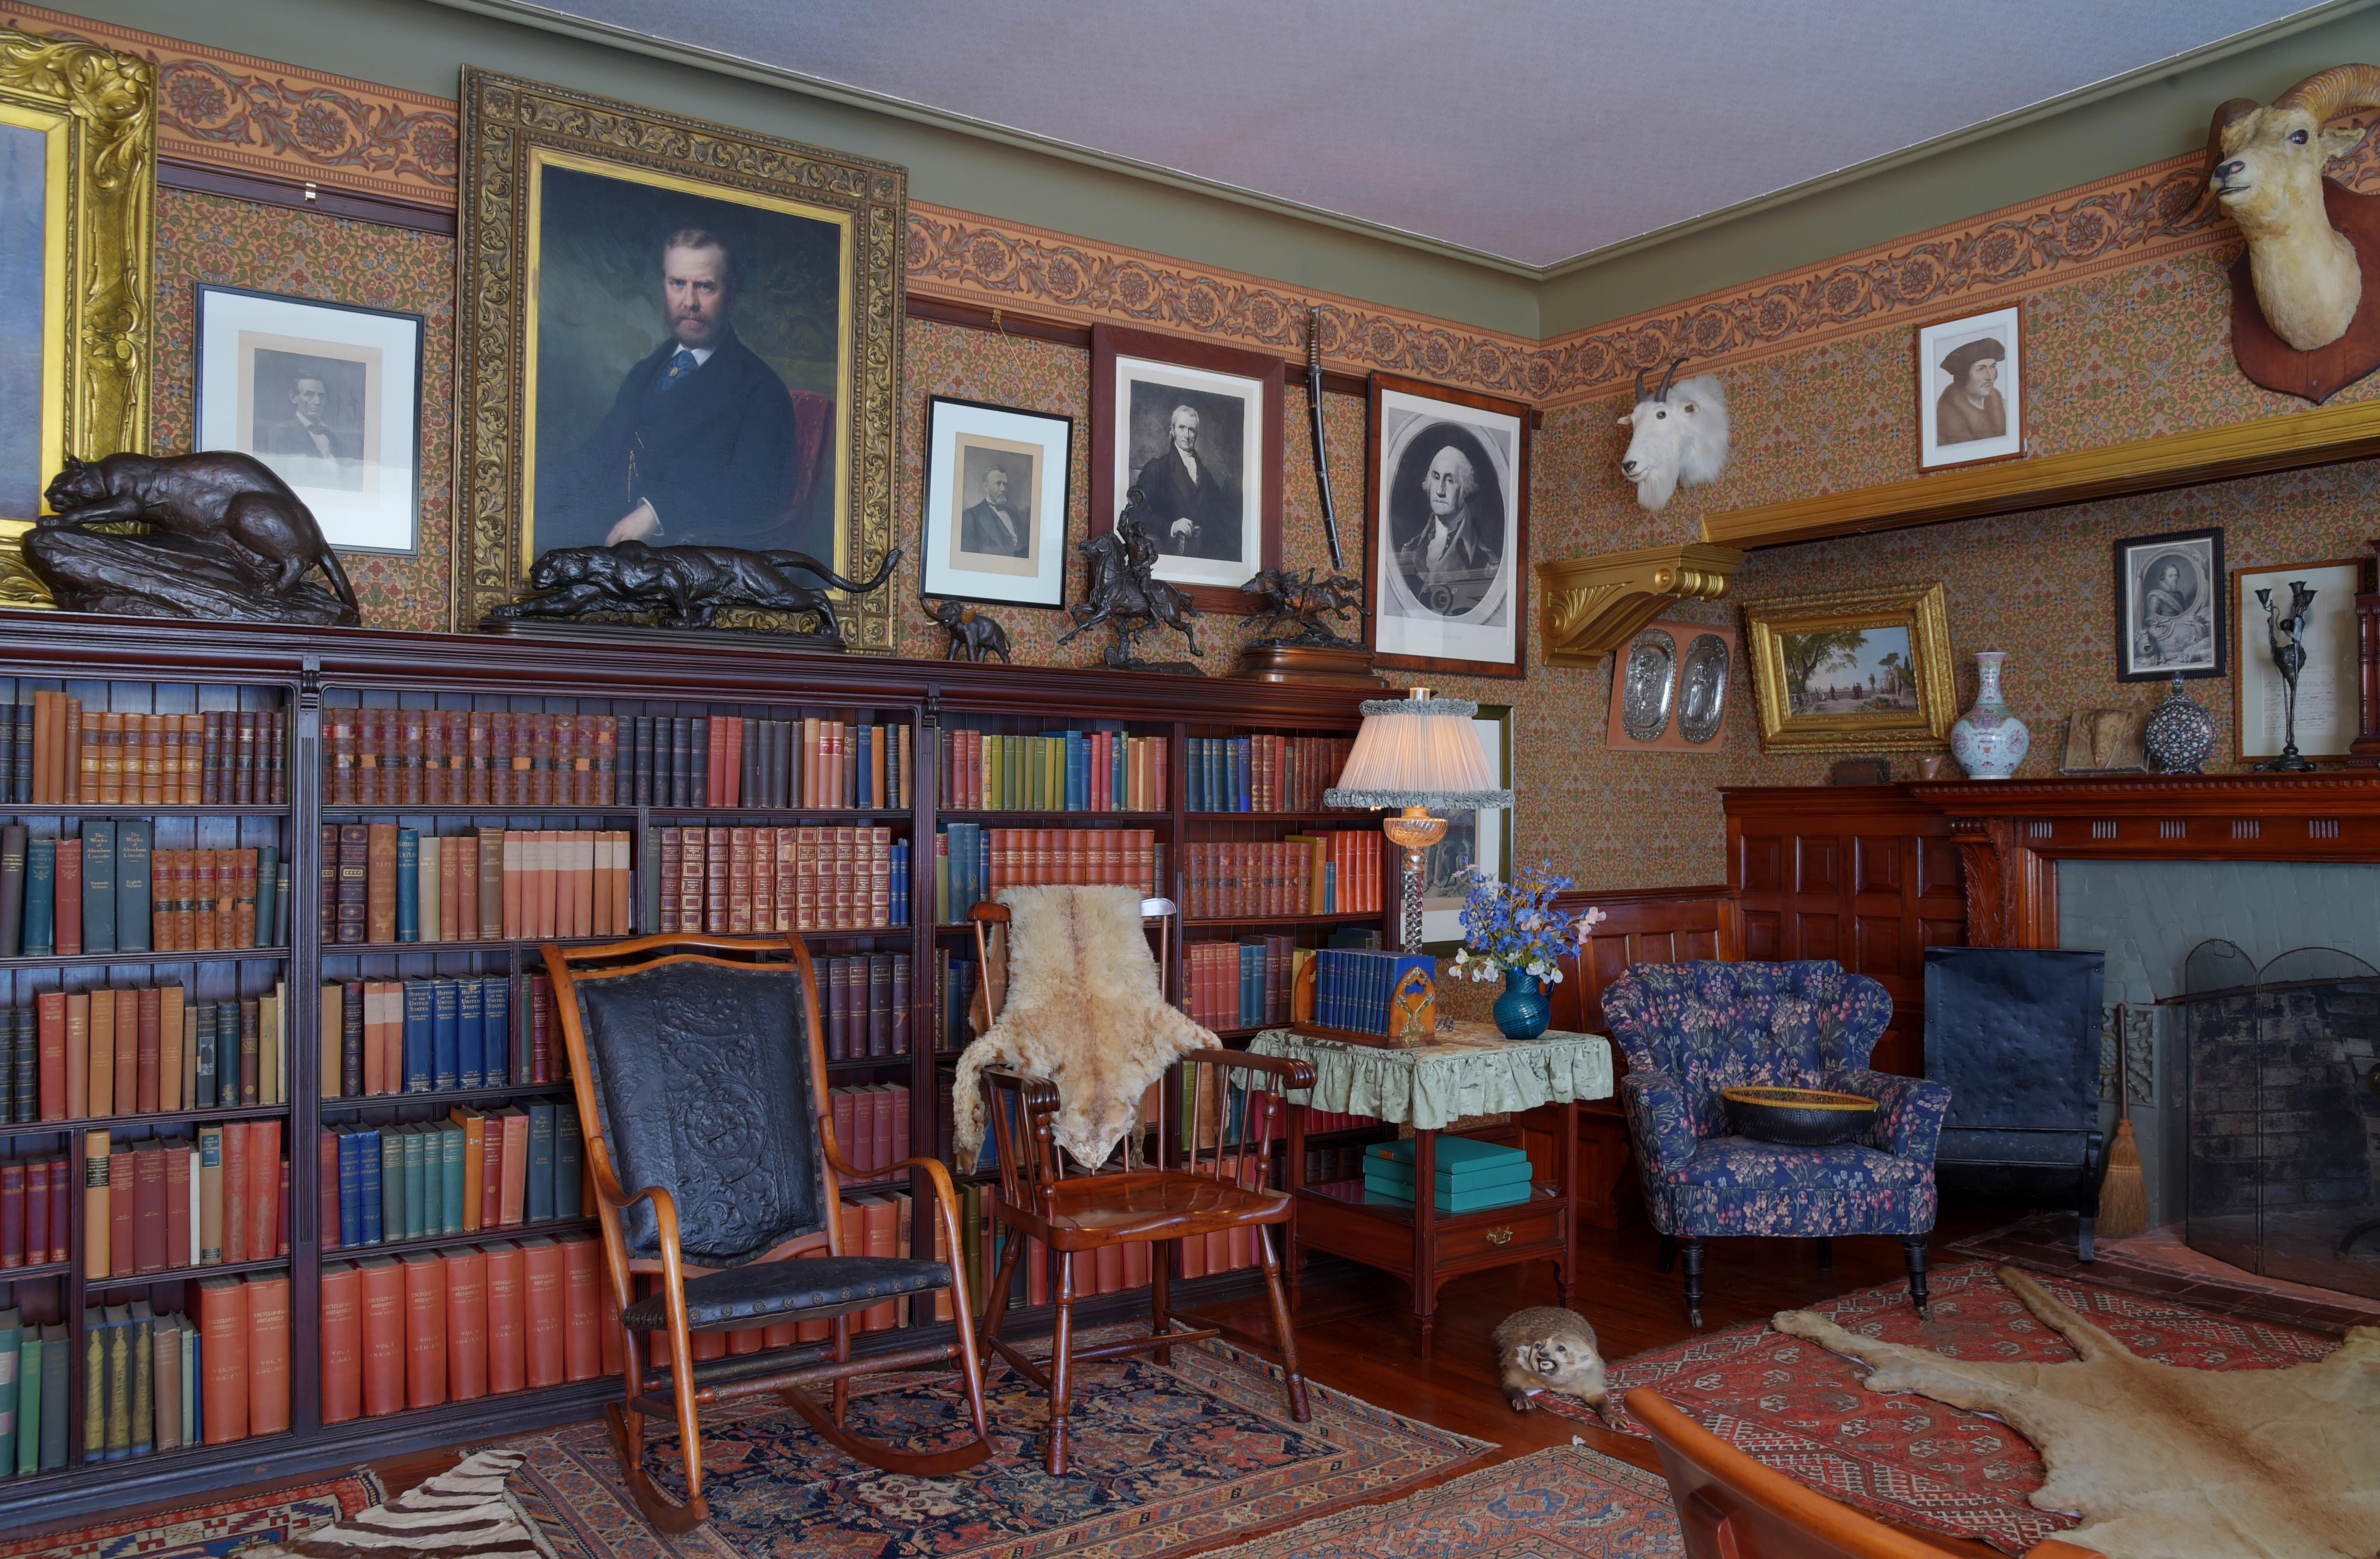 A view of President Roosevelt's library and office at Sagamore Hill.